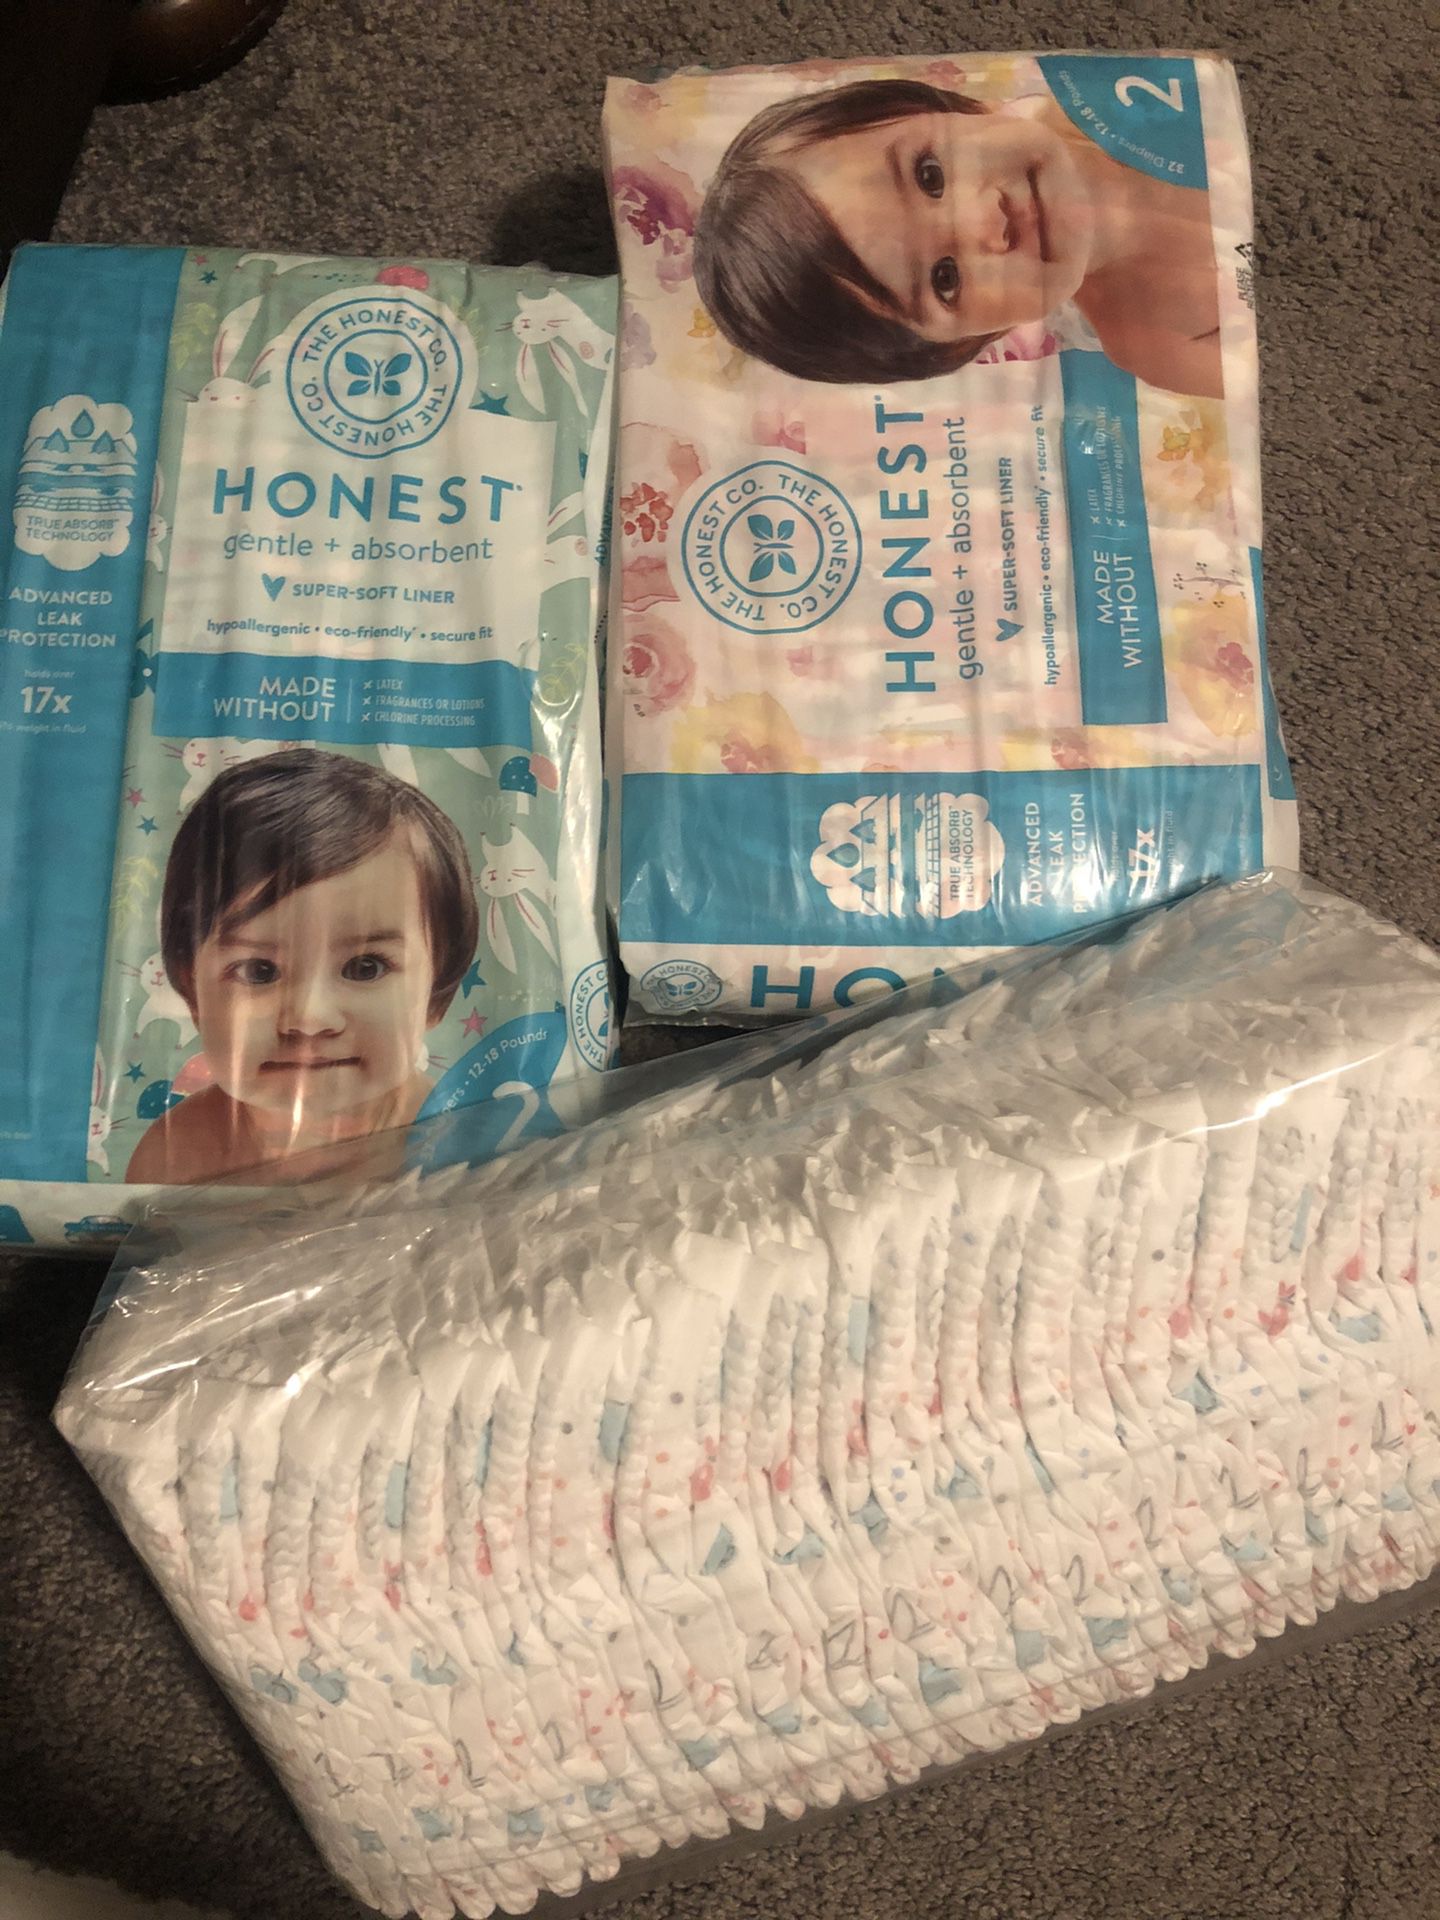 Size 2 diapers (the honest company & huggies)